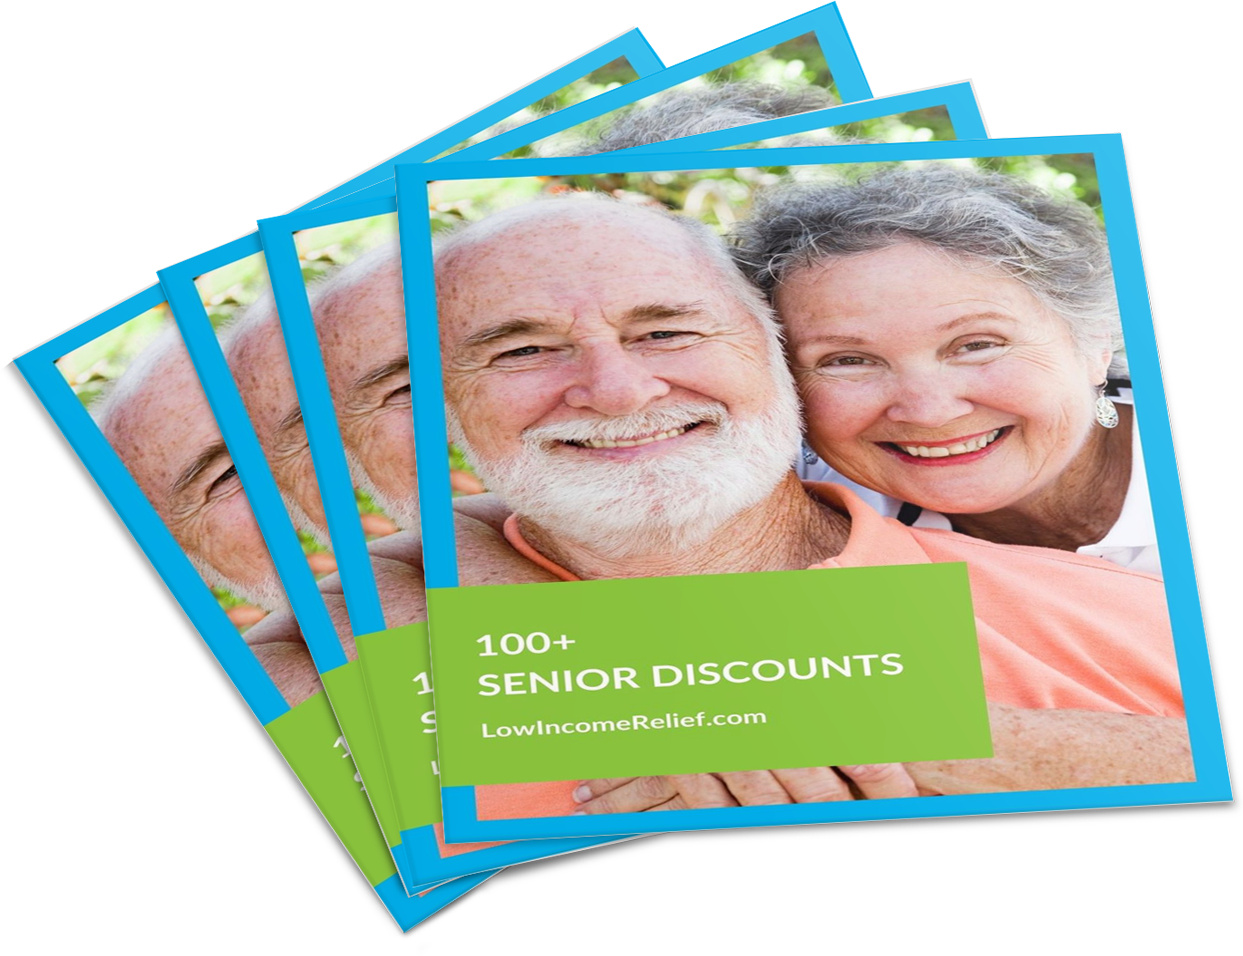 100-incredible-senior-discounts-verified-list-low-income-relief